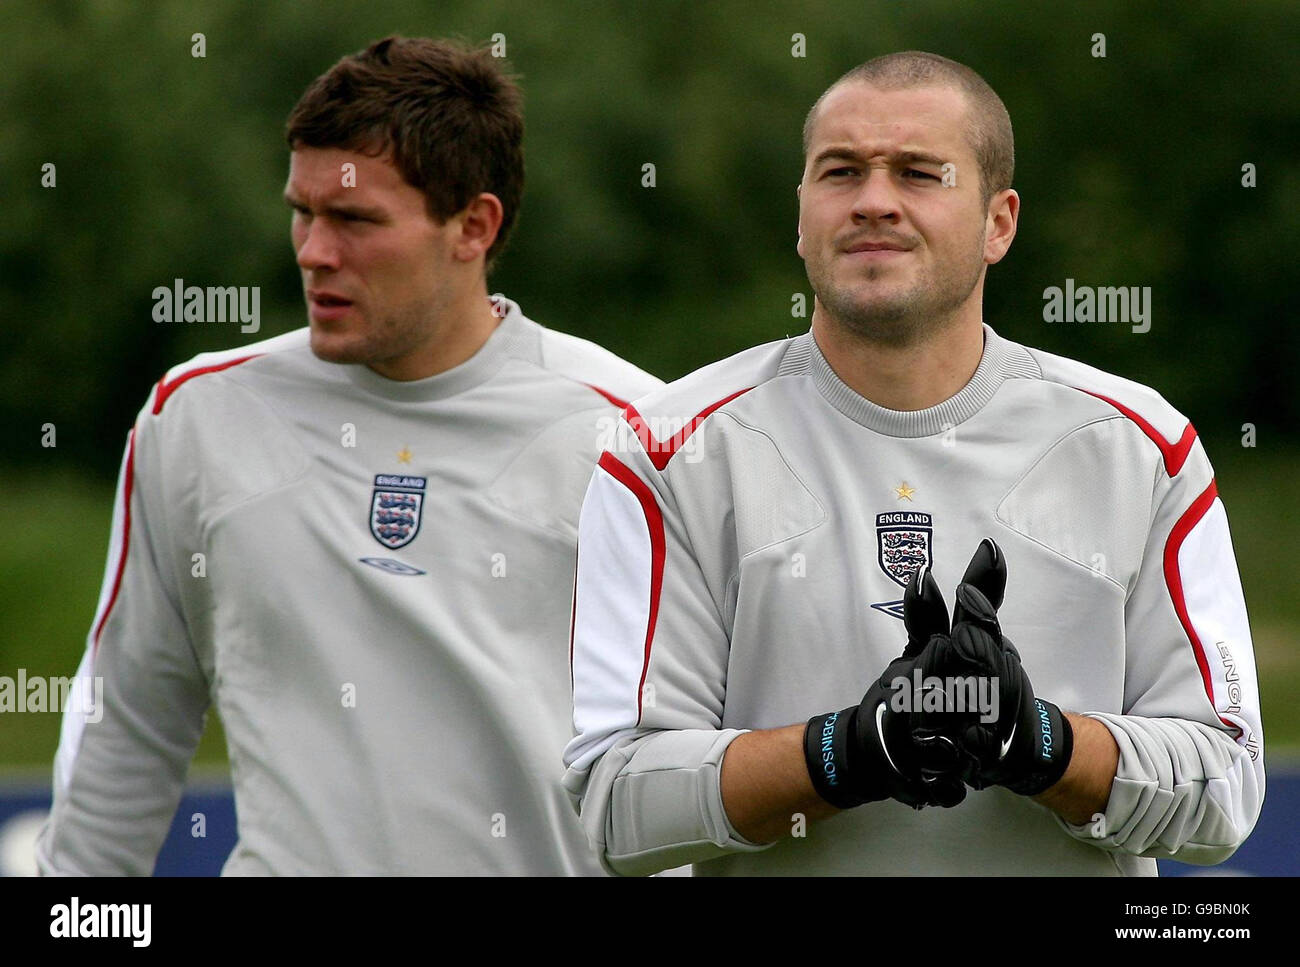 SOCCER England. England goalkeeper Paul Robinson (right) with Ben Forster during a training session at Carrington, Manchester. Stock Photo